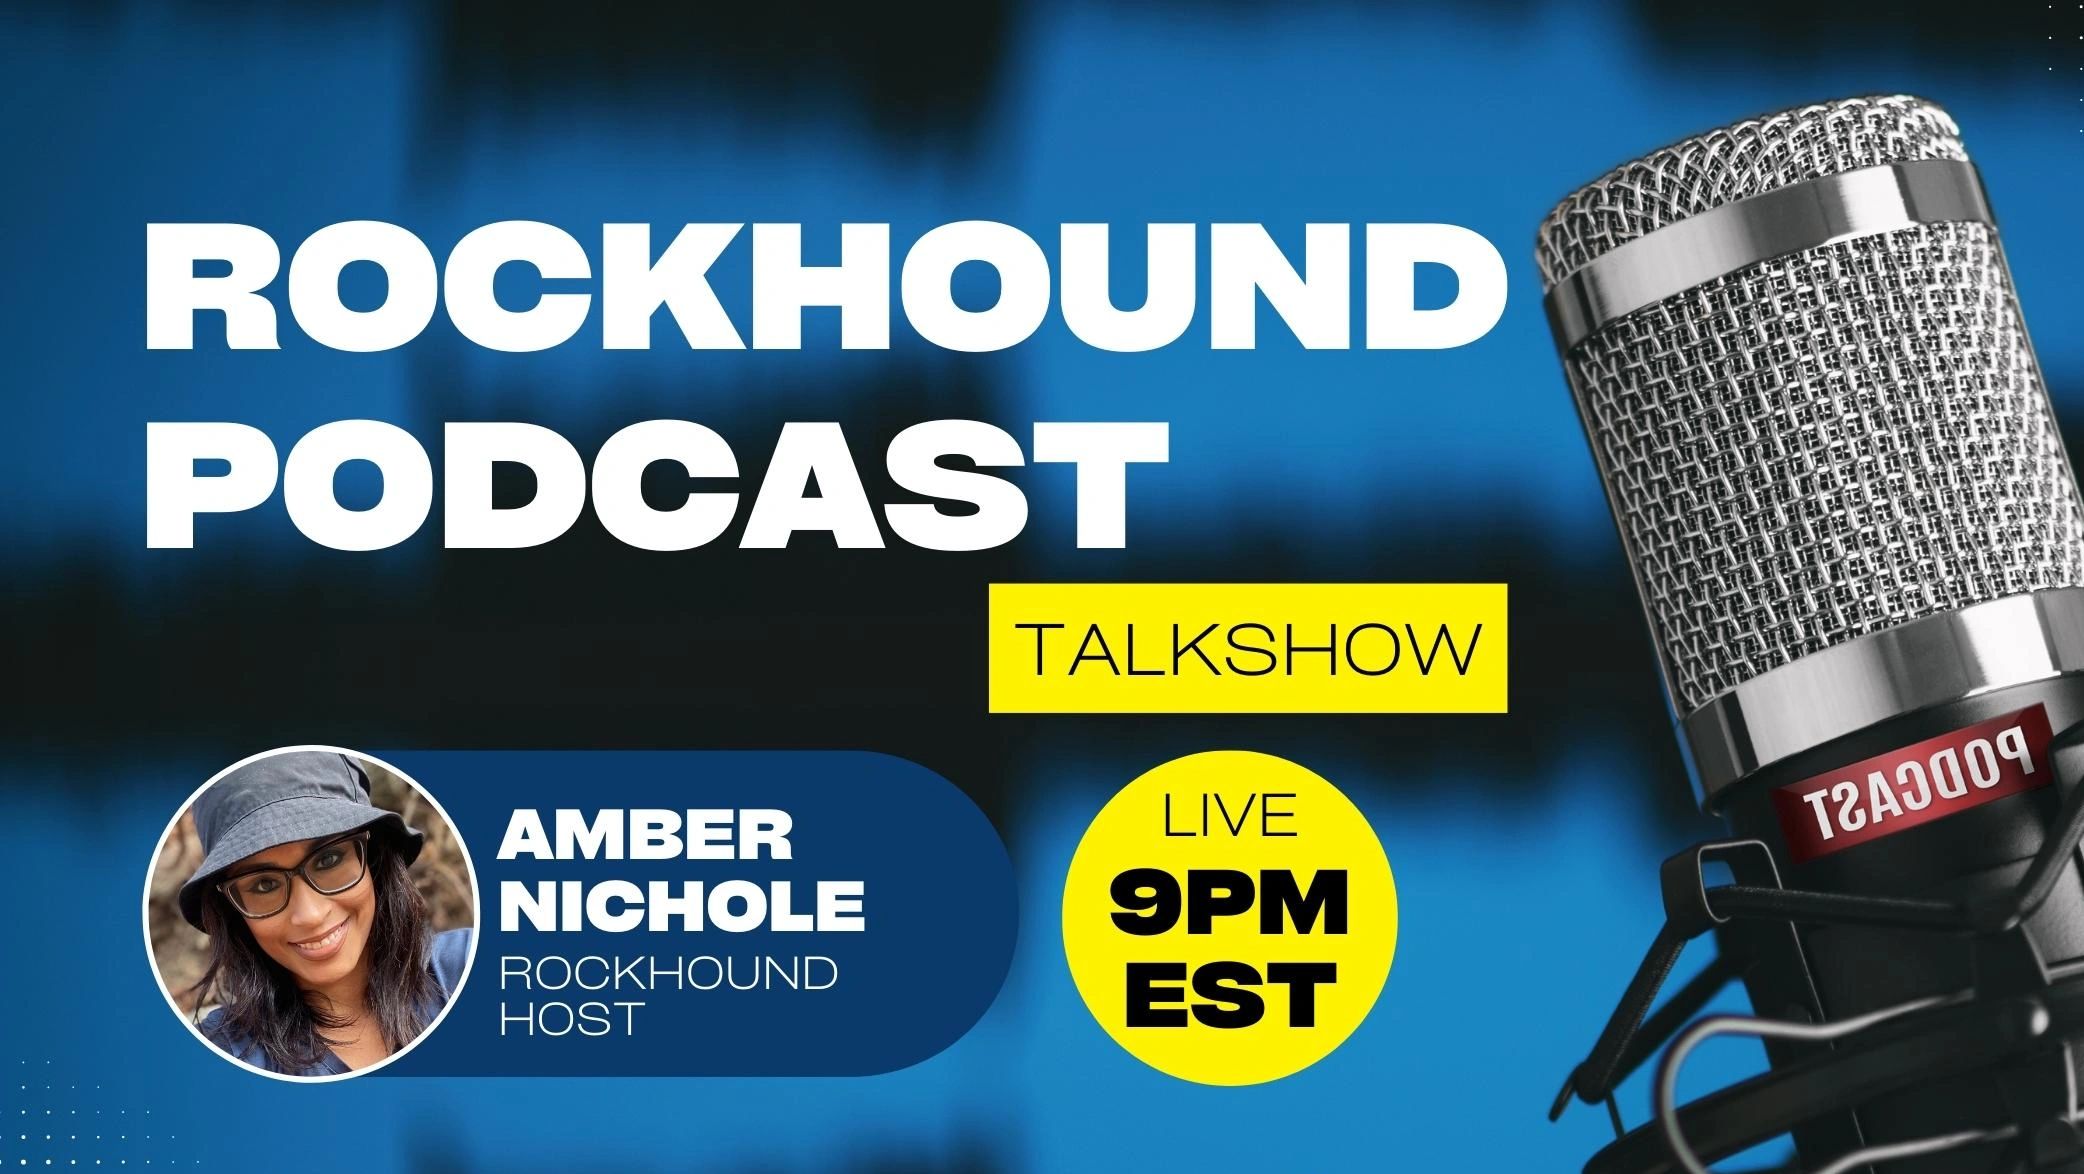 Weekly Live Rockhound Podcast Talk Show with Amber Nichole 